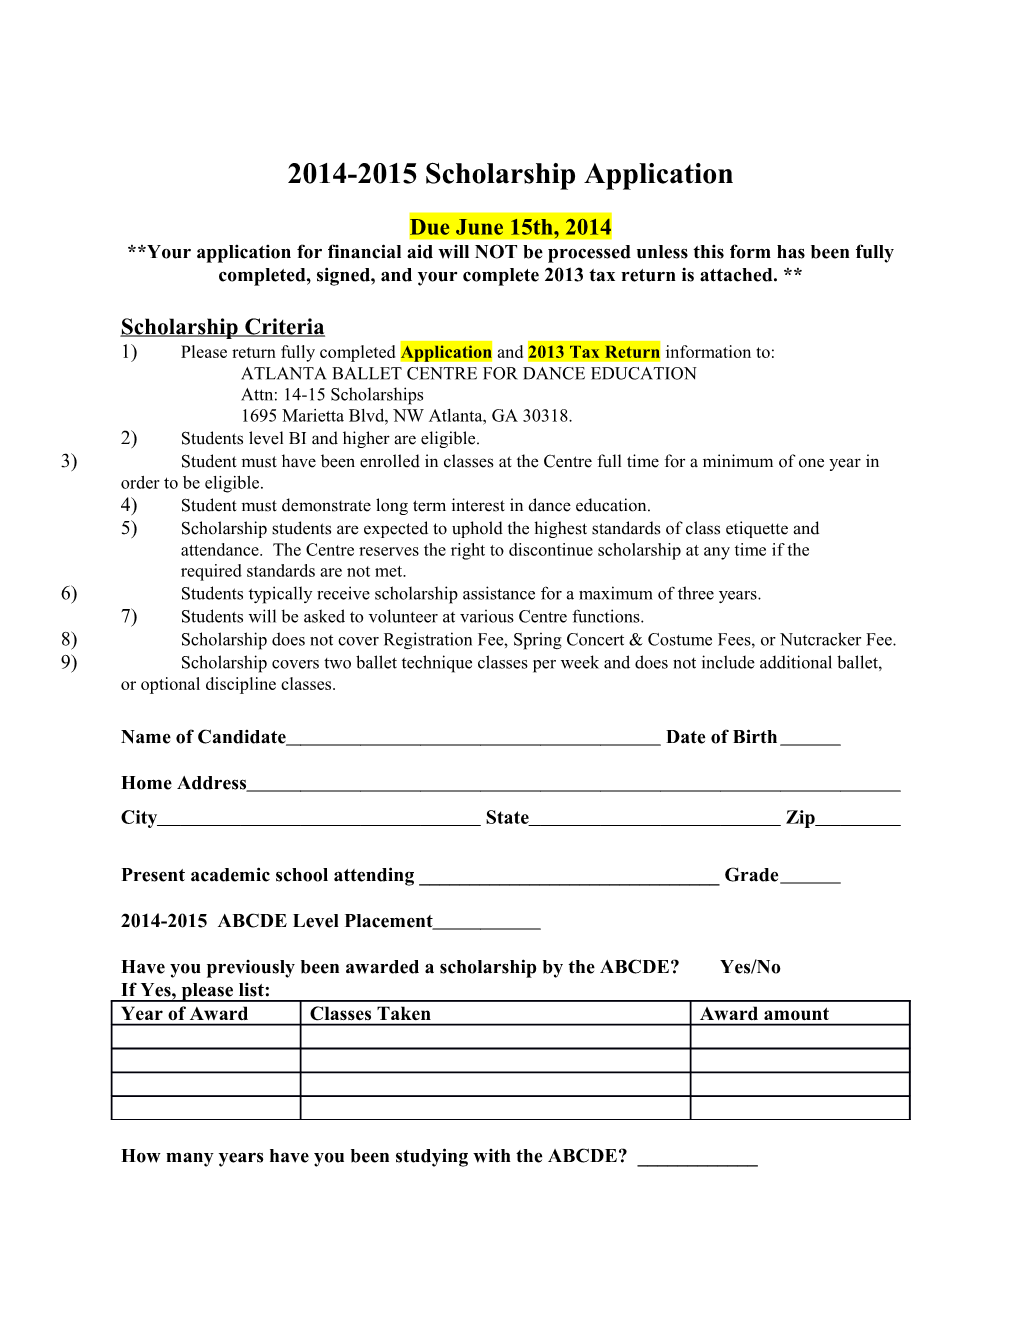 Your Application for Financial Aid Will NOT Be Processed Unless This Form Has Been Fully